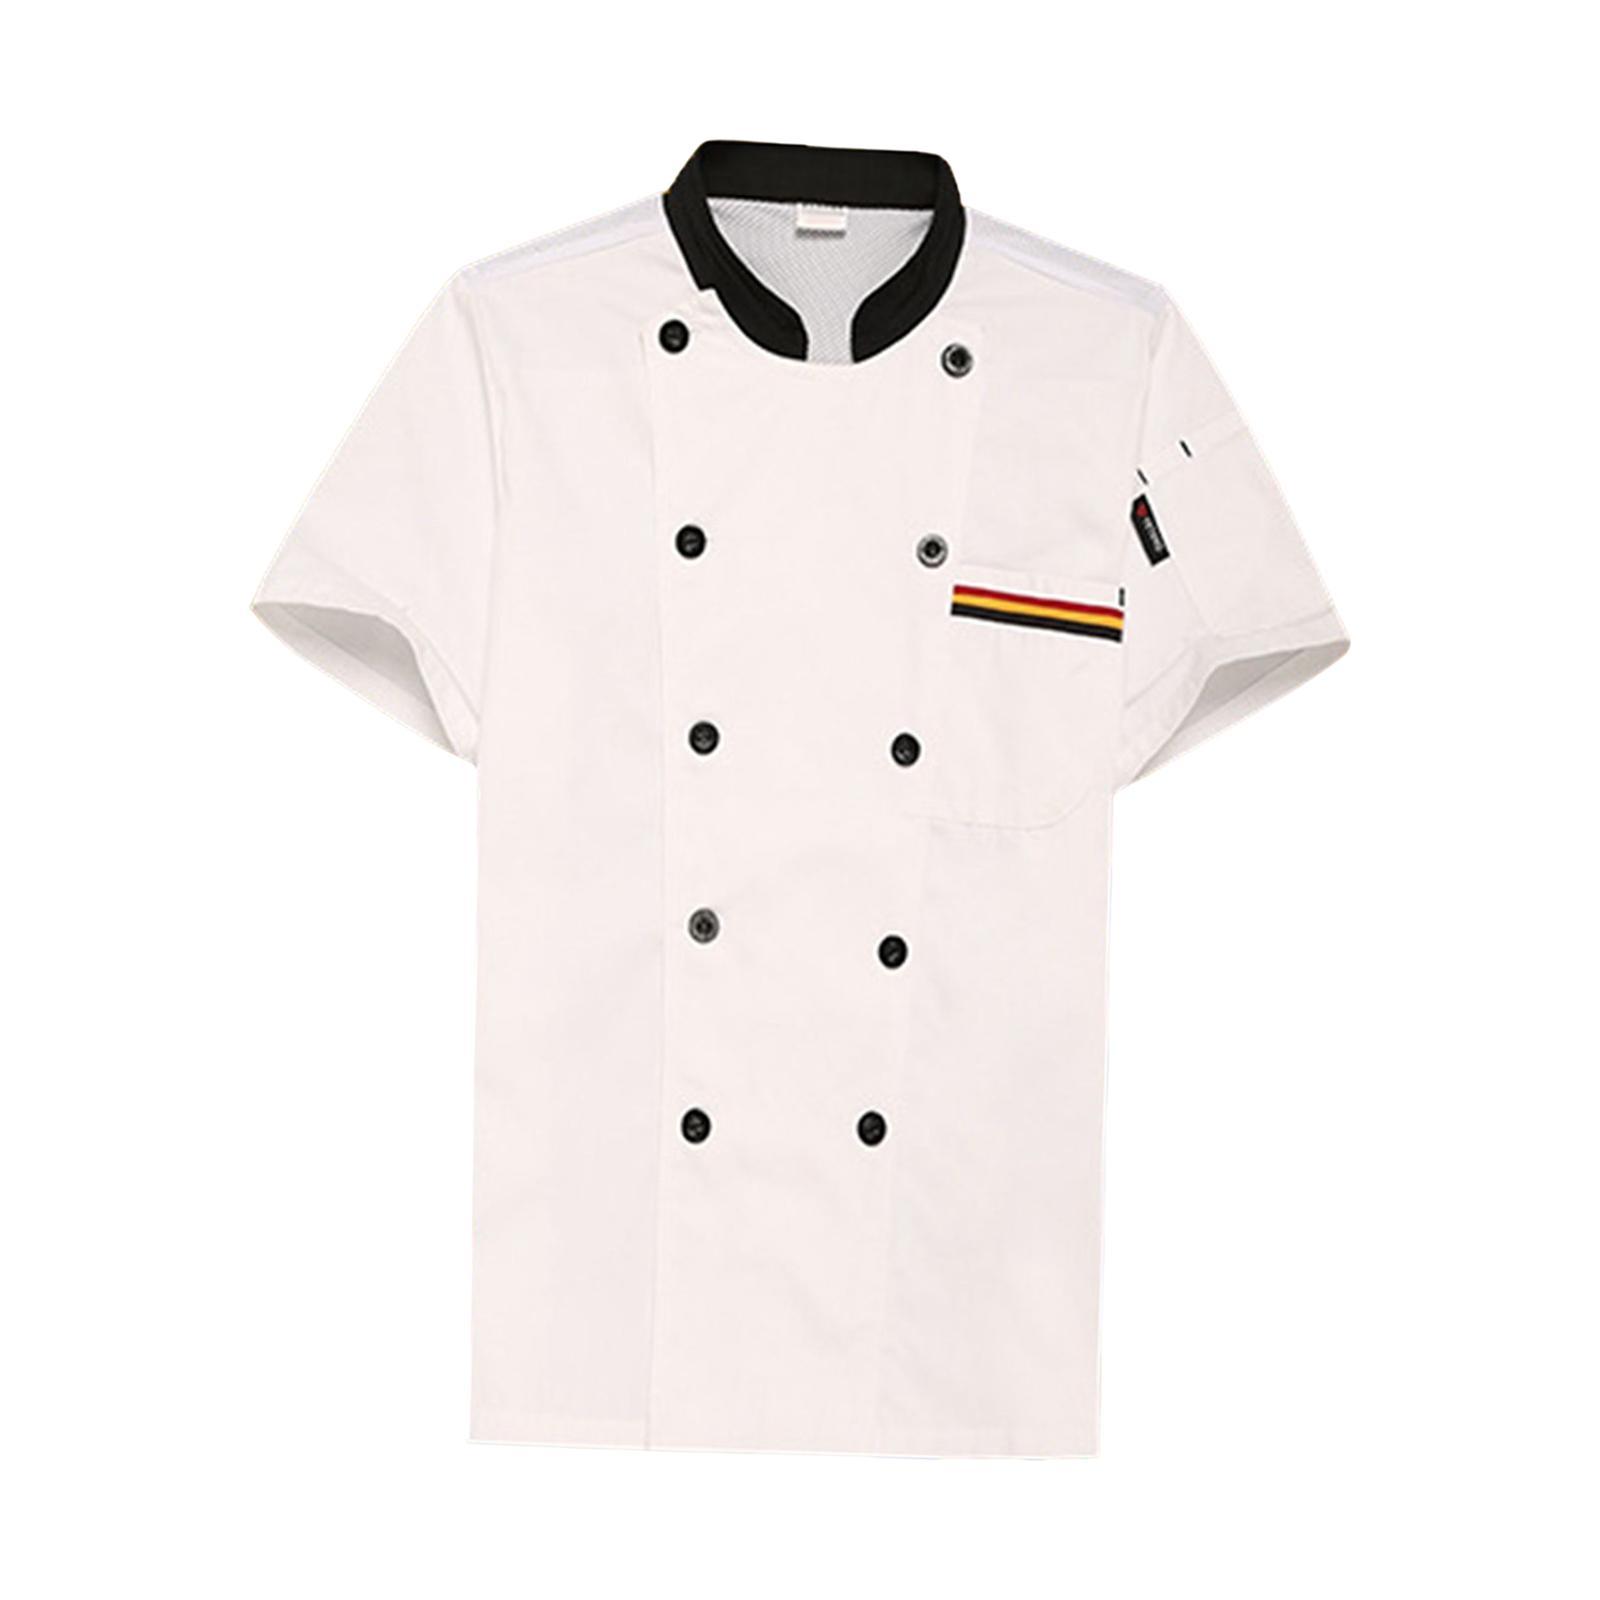 Unisex Chef Coat Workwear Chef Jacket for Food Service Catering Restaurant